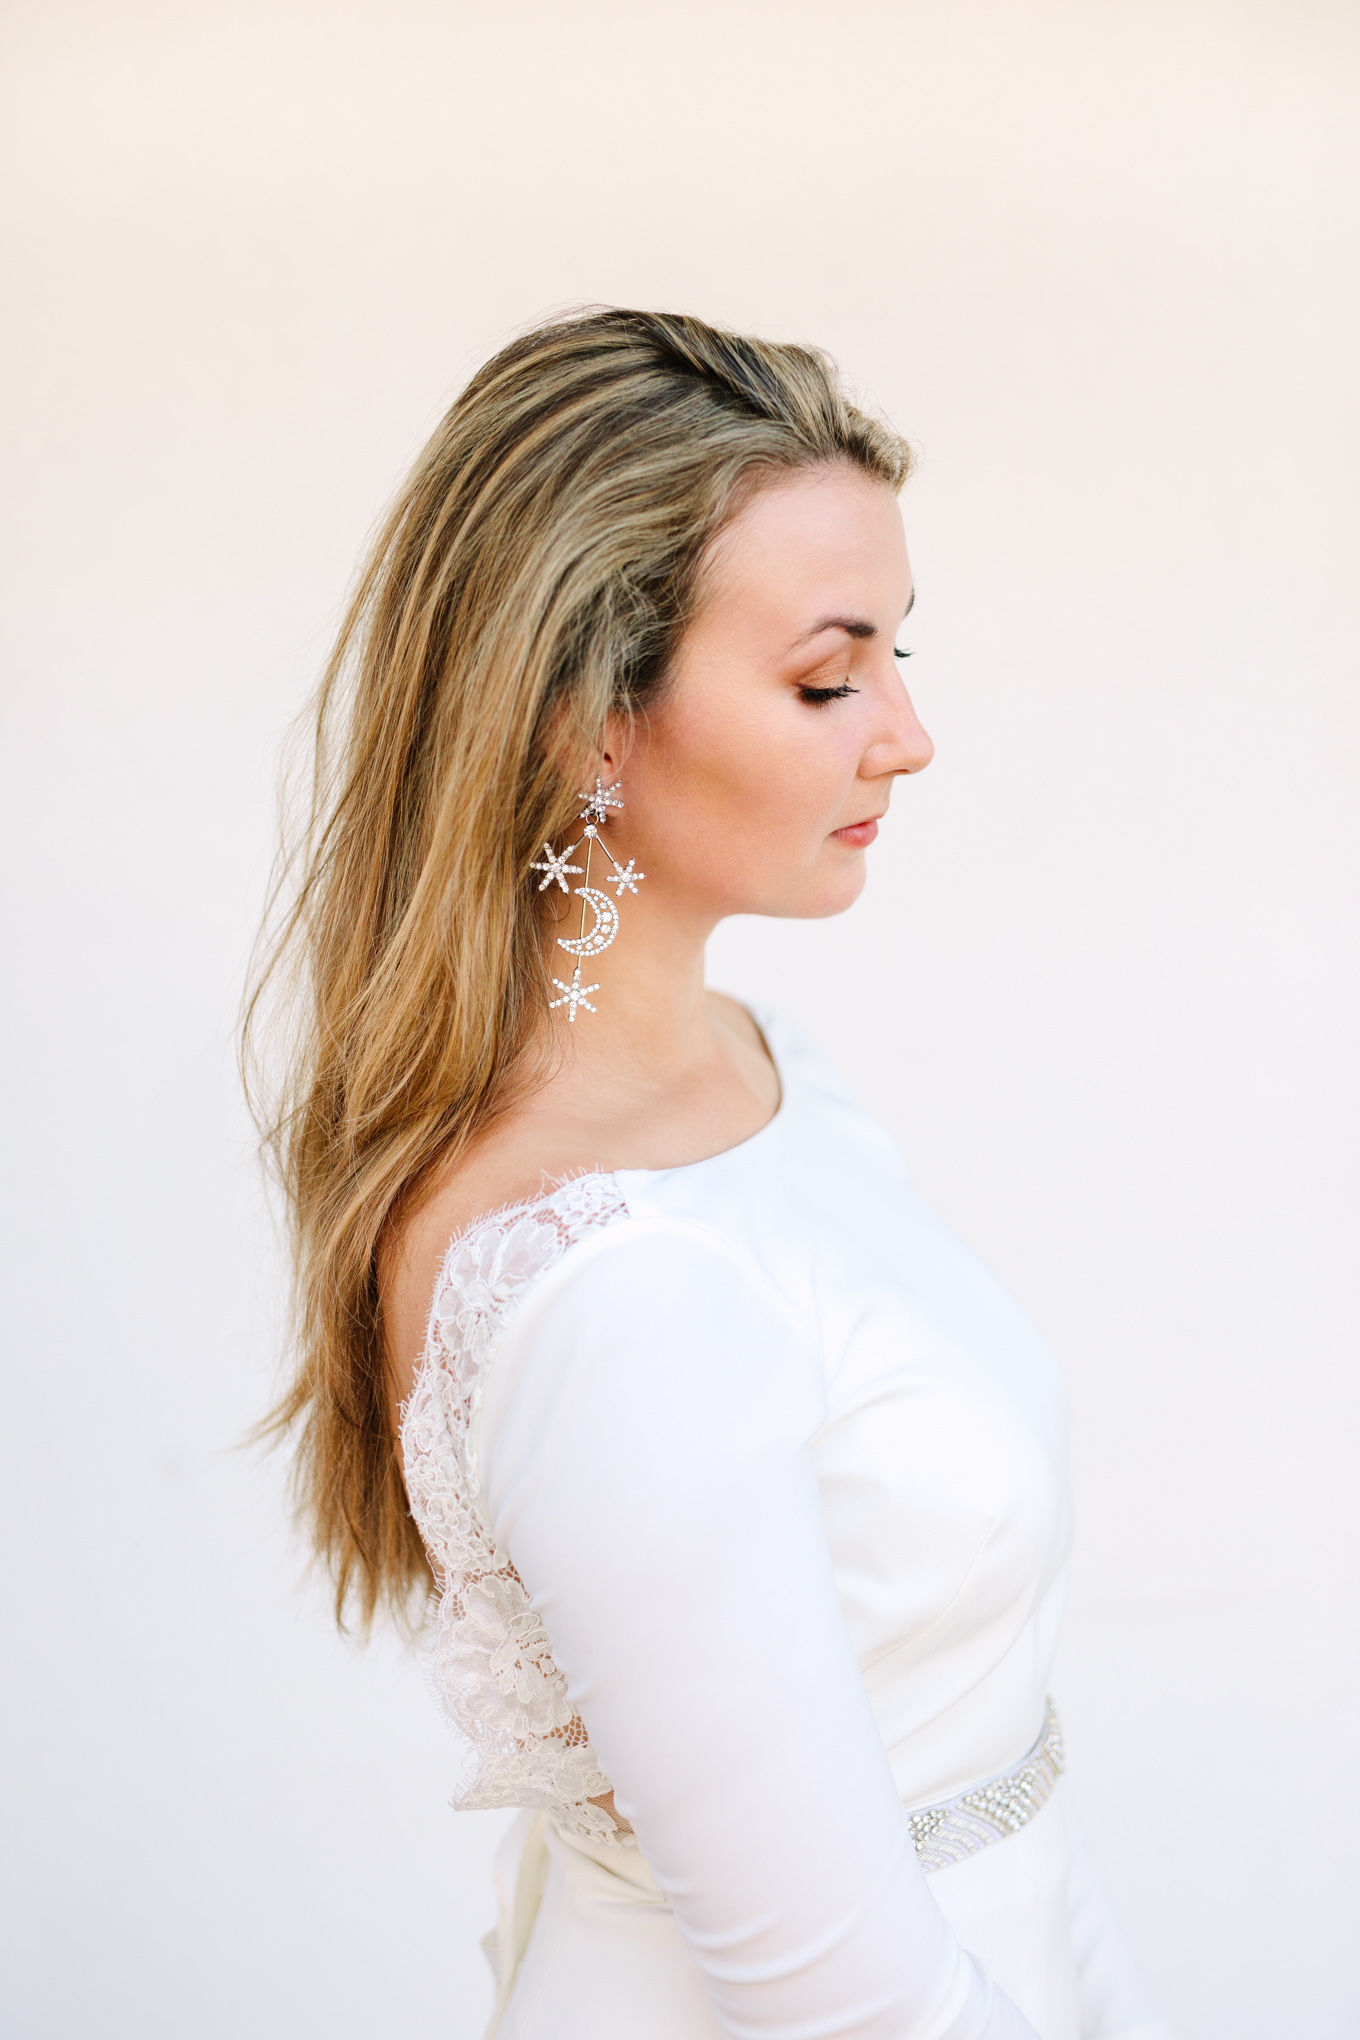 Bride with celestial earrings | Colorful jewel tone Palm Springs elopement | Fresh and colorful photography for fun-loving couples in Southern California | #colorfulelopement #palmspringselopement #elopementphotography #palmspringswedding Source: Mary Costa Photography | Los Angeles